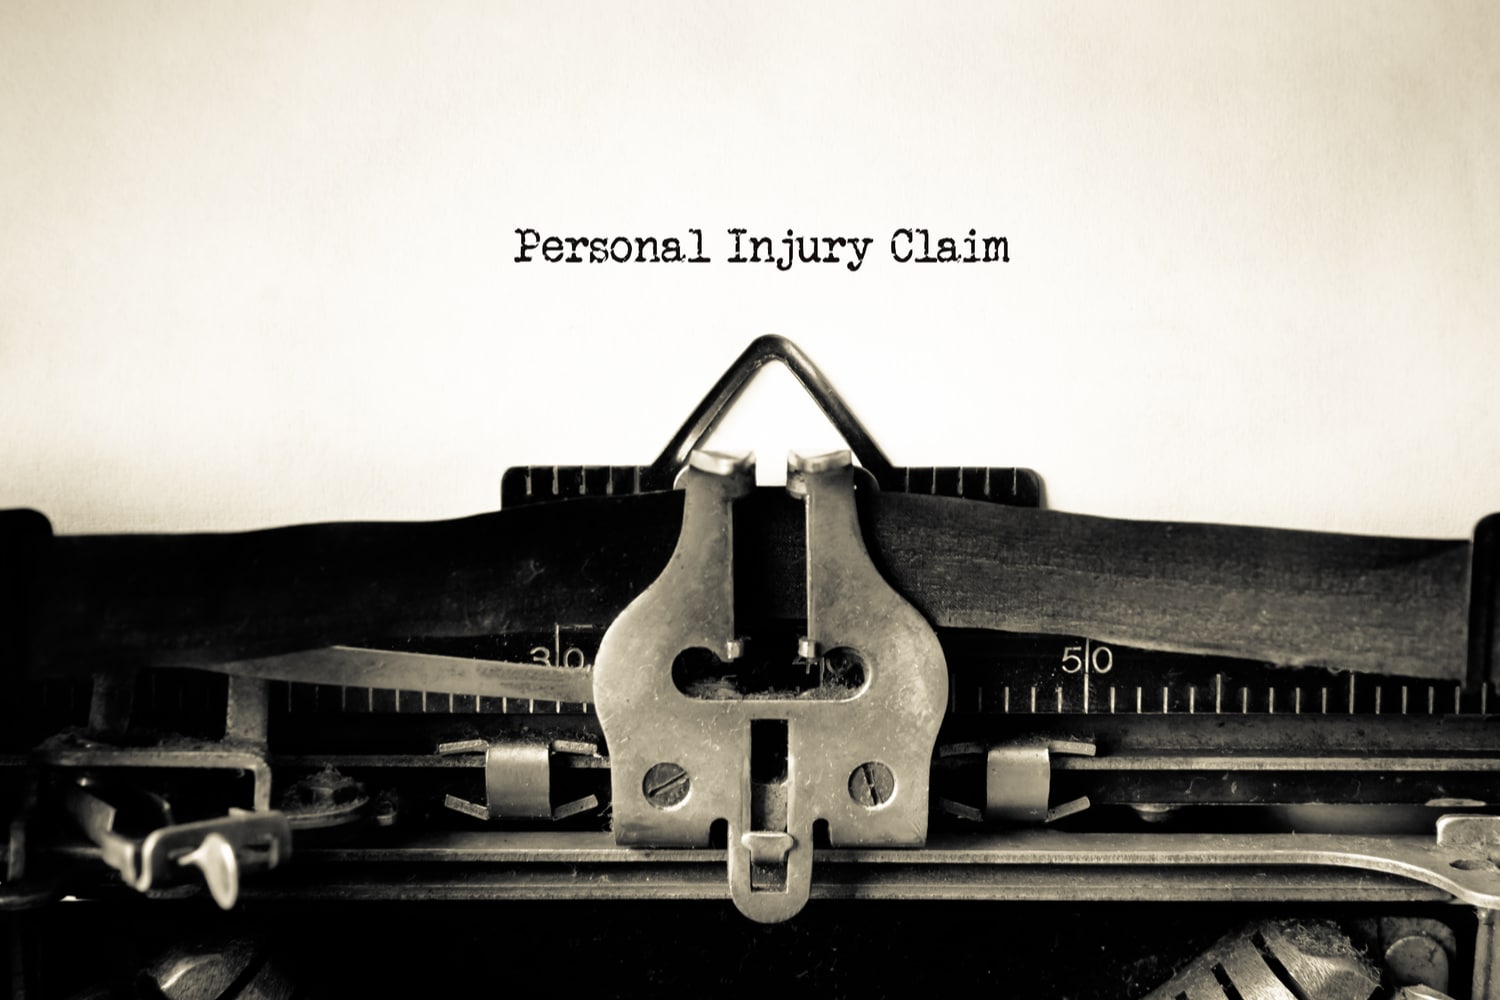 personal injury proceeds are not taxable